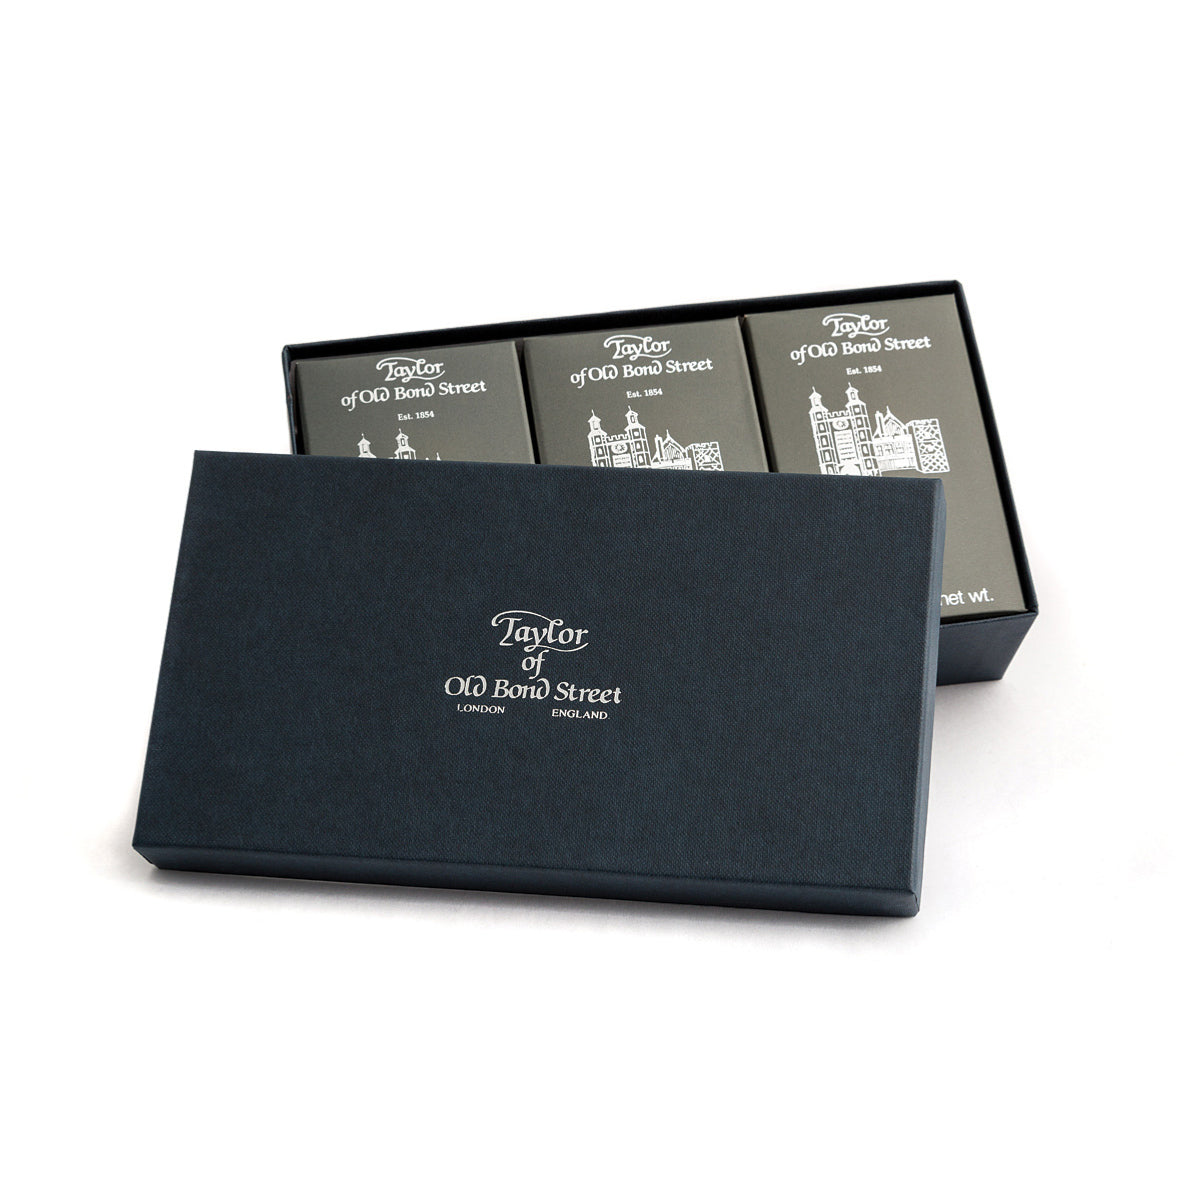 Taylor of Old Bond Street Eton College Collection Bath Soap Gift Set - Cyril R. Salter